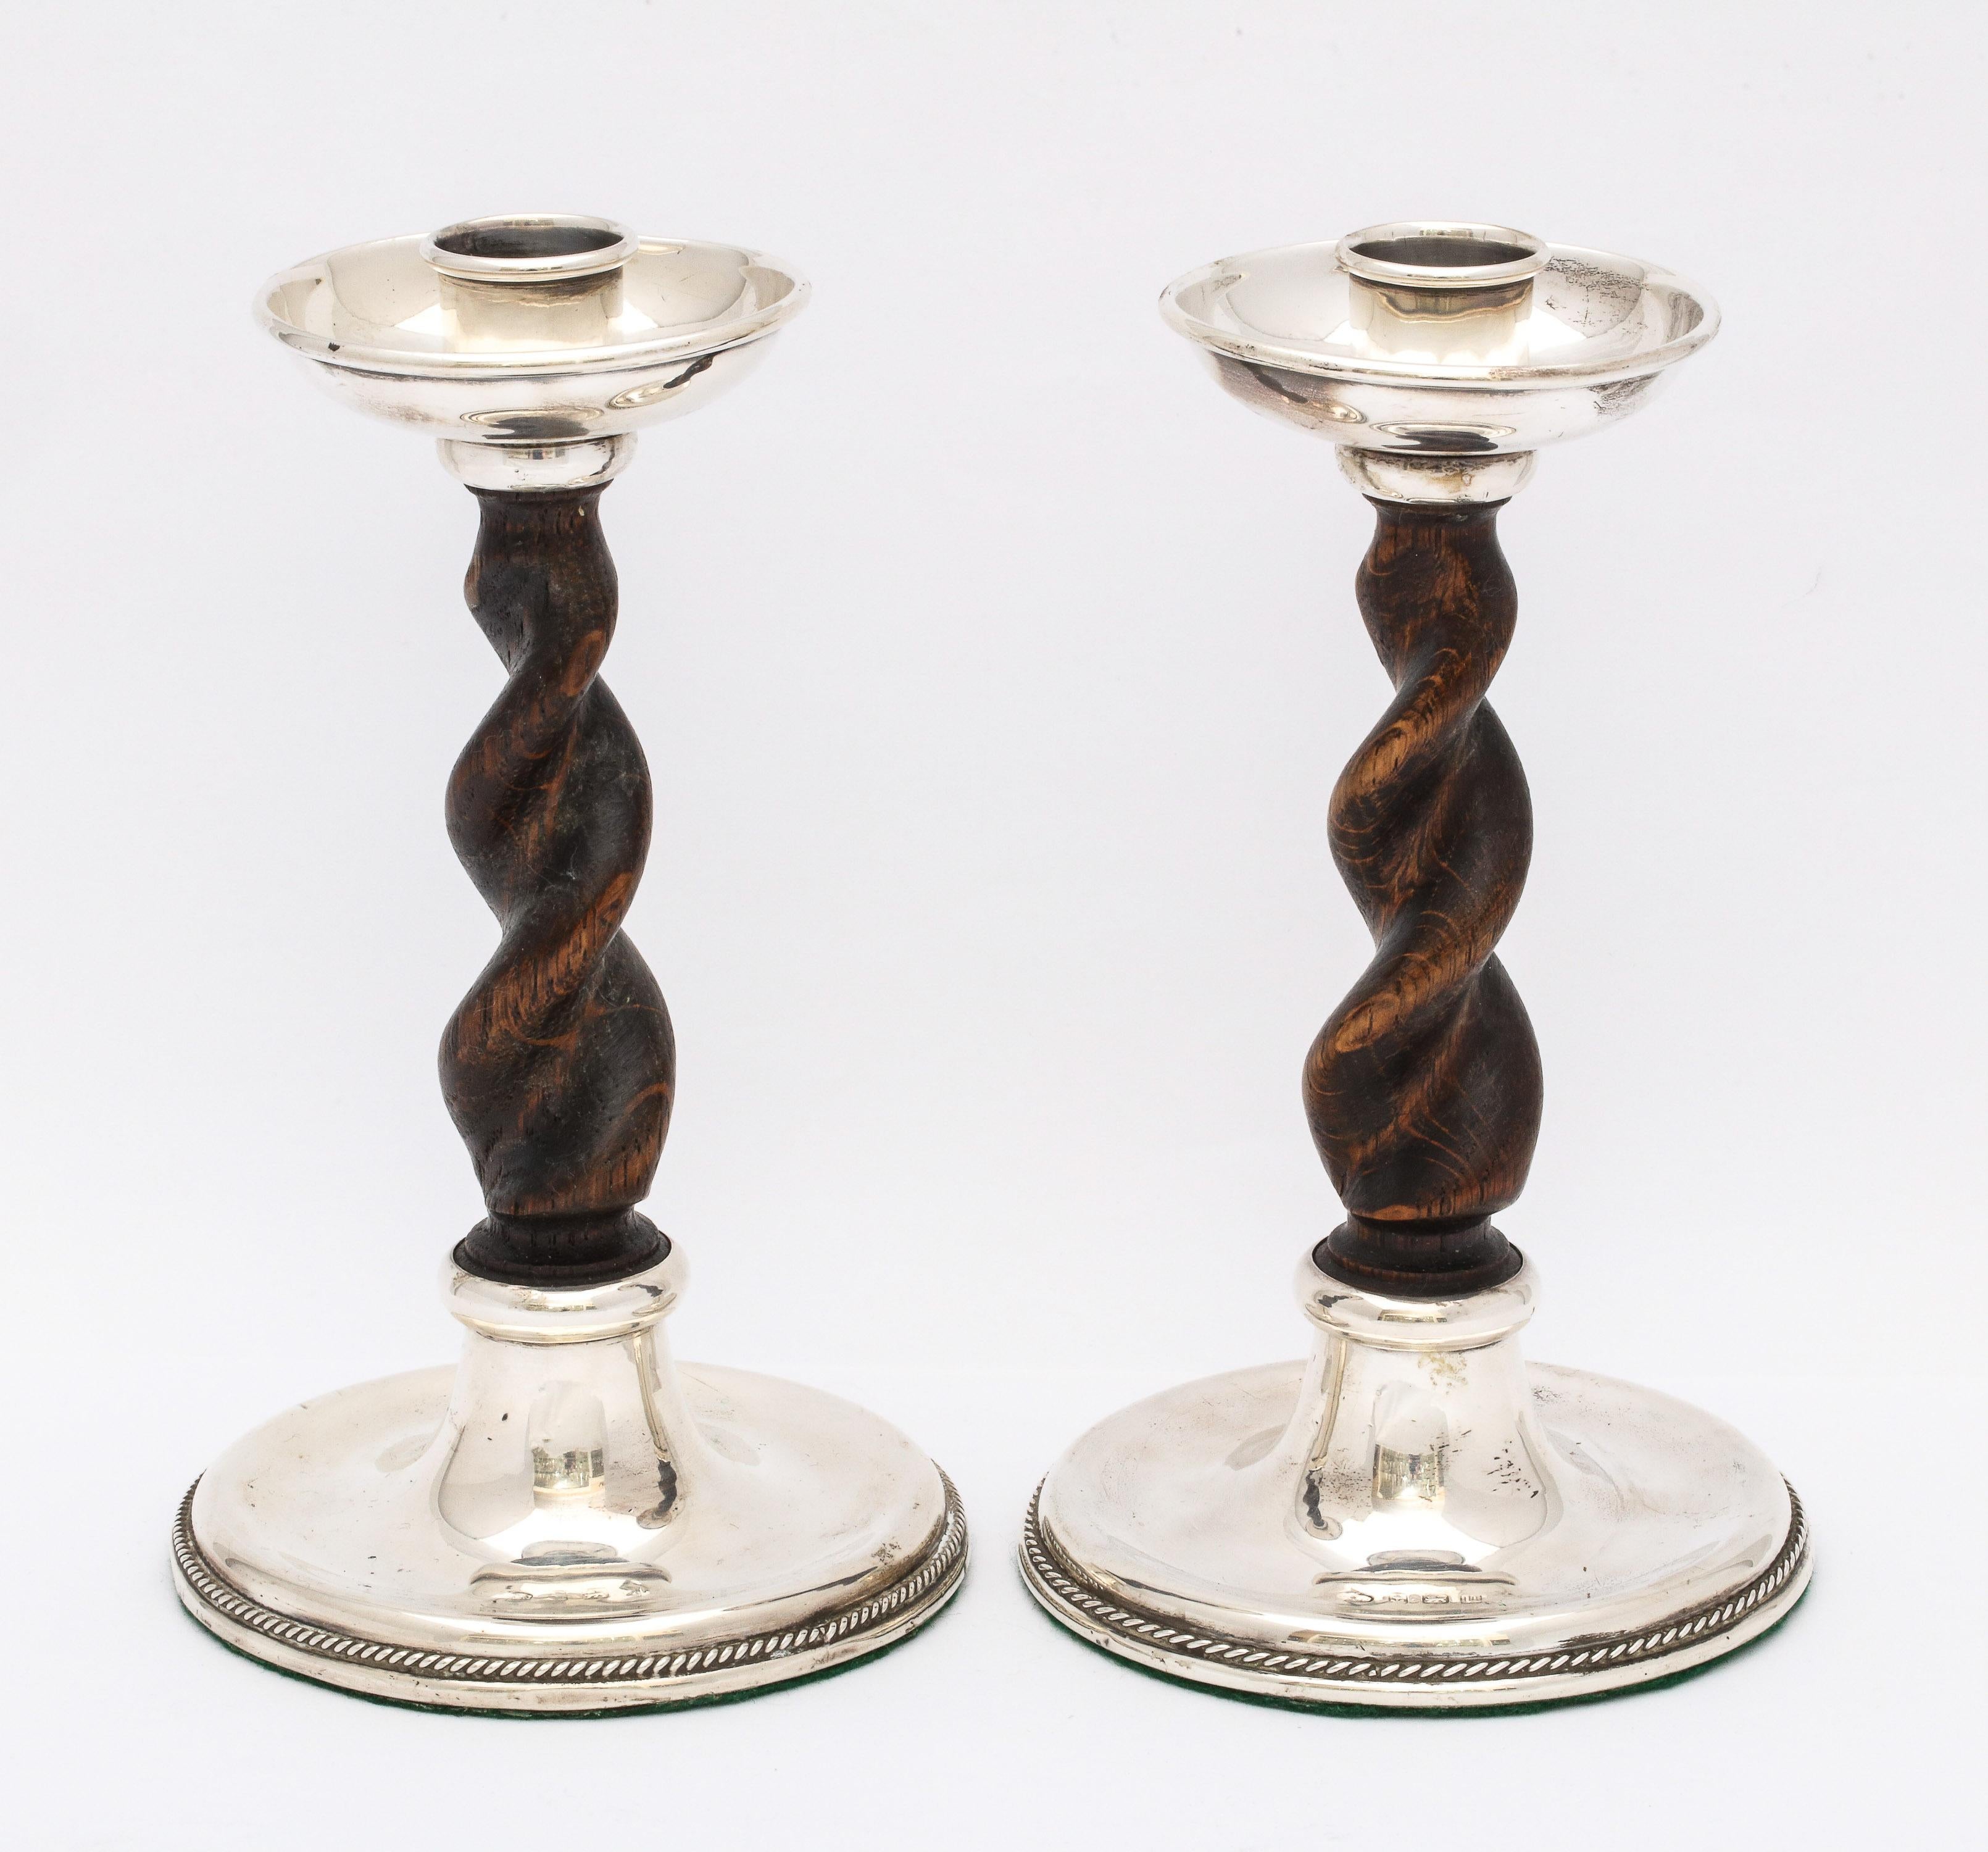 Arts & Crafts Pair of Sterling Silver-Mounted Wood Barley Twist Candlesticks 1